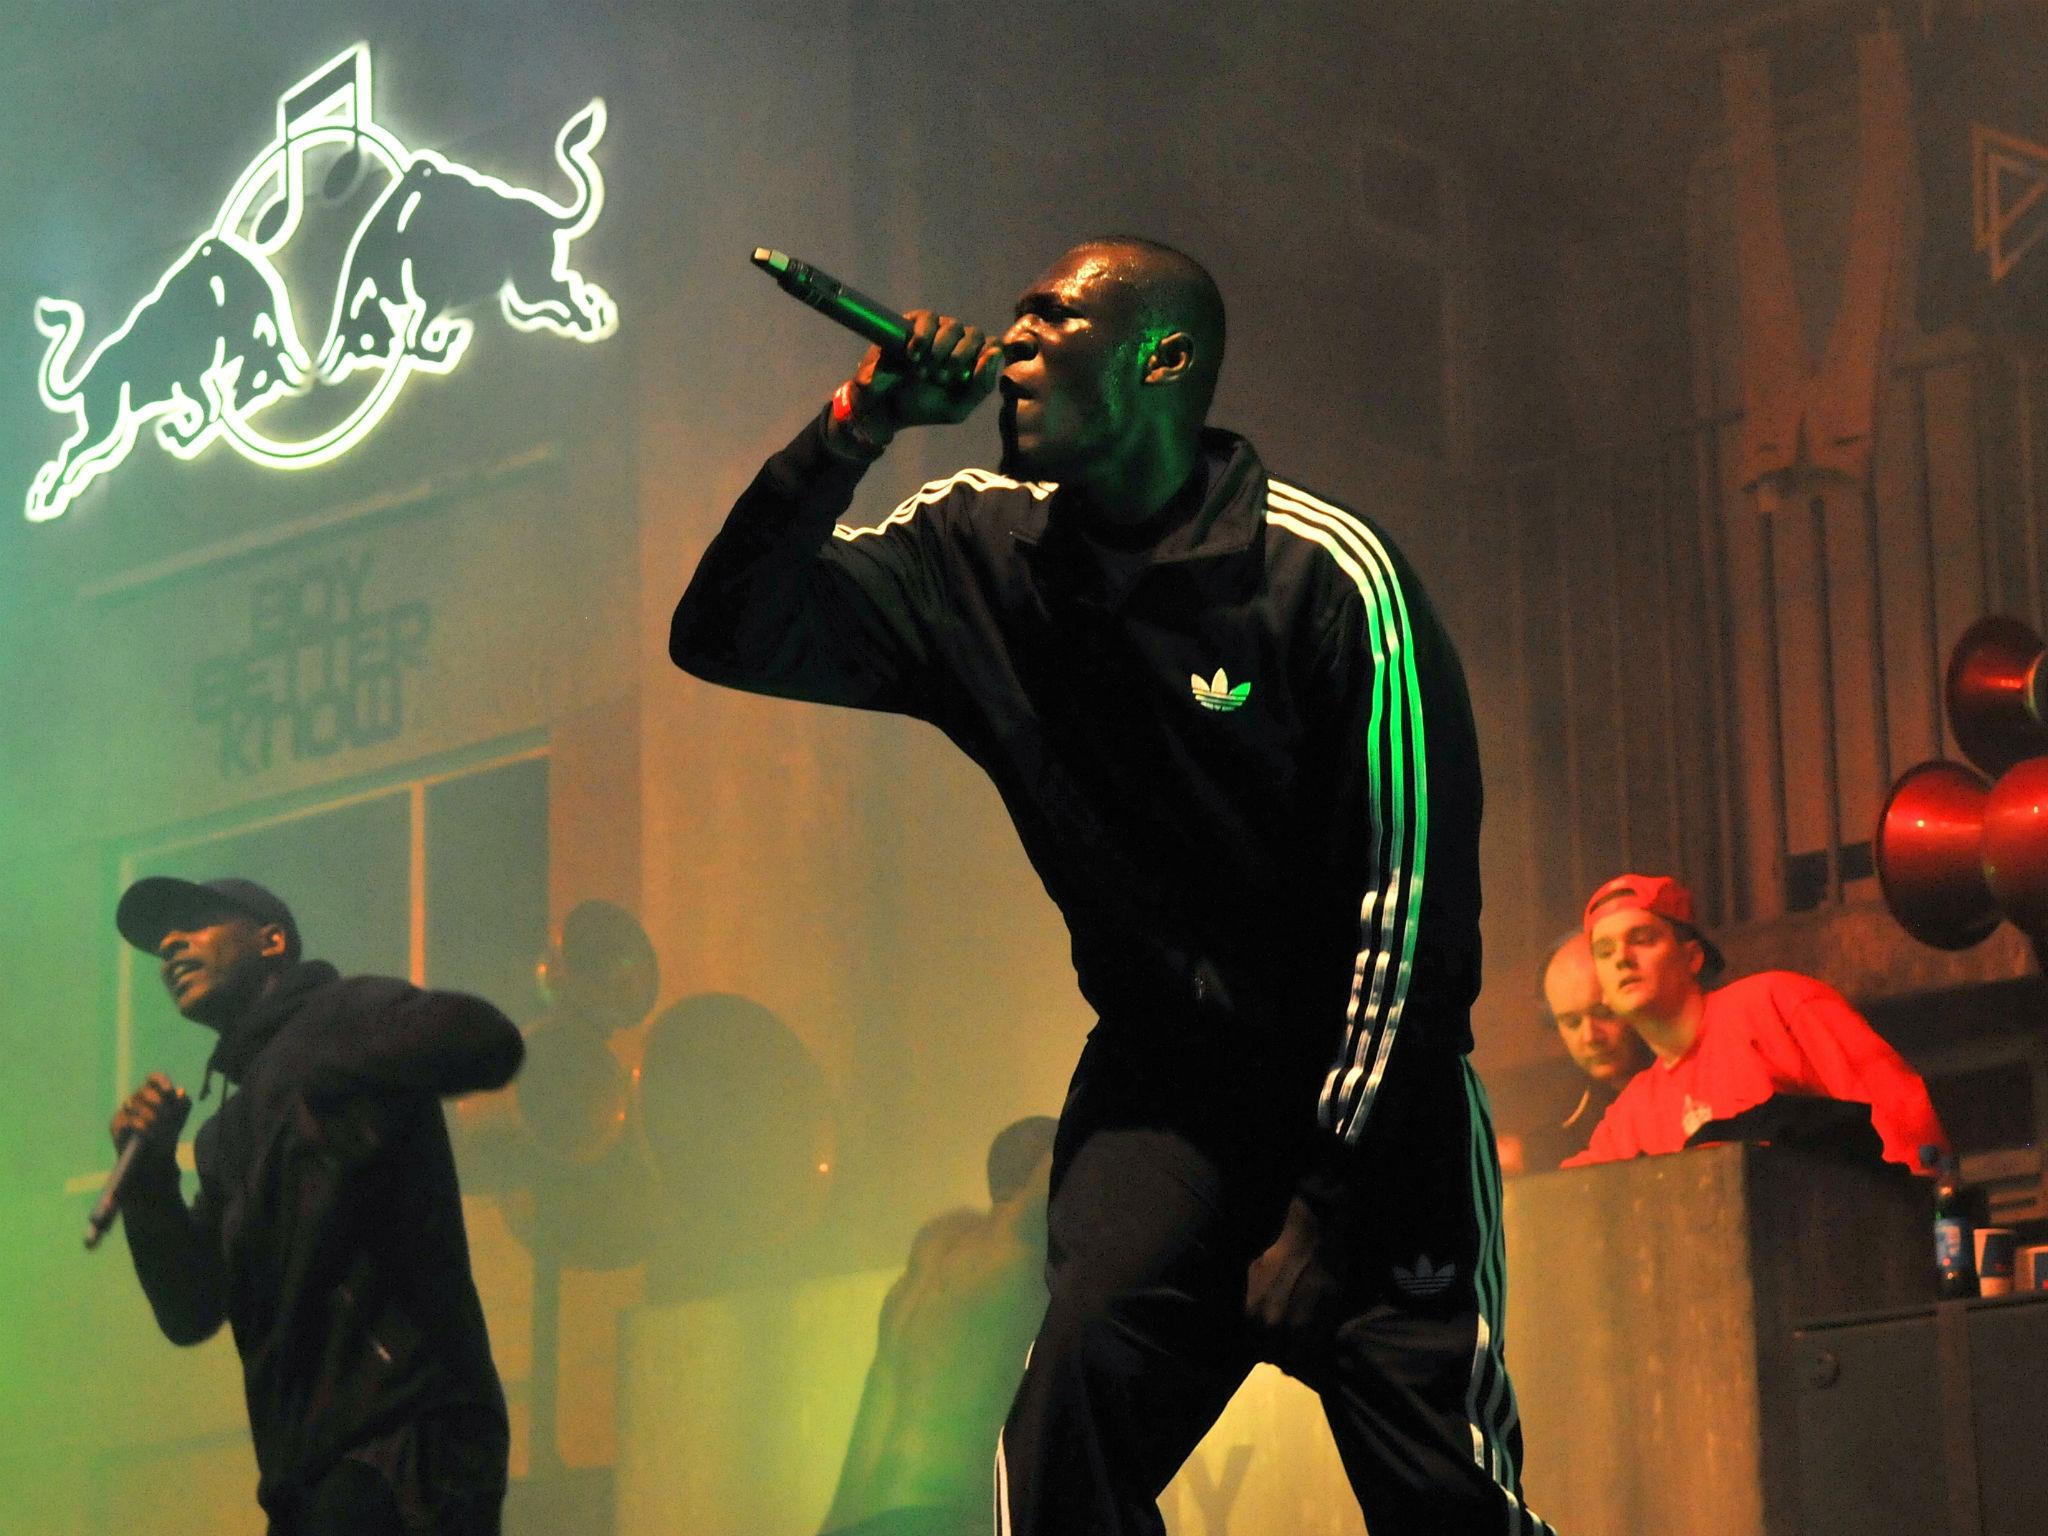 Stormzy is set to release his anticipated debut album this year